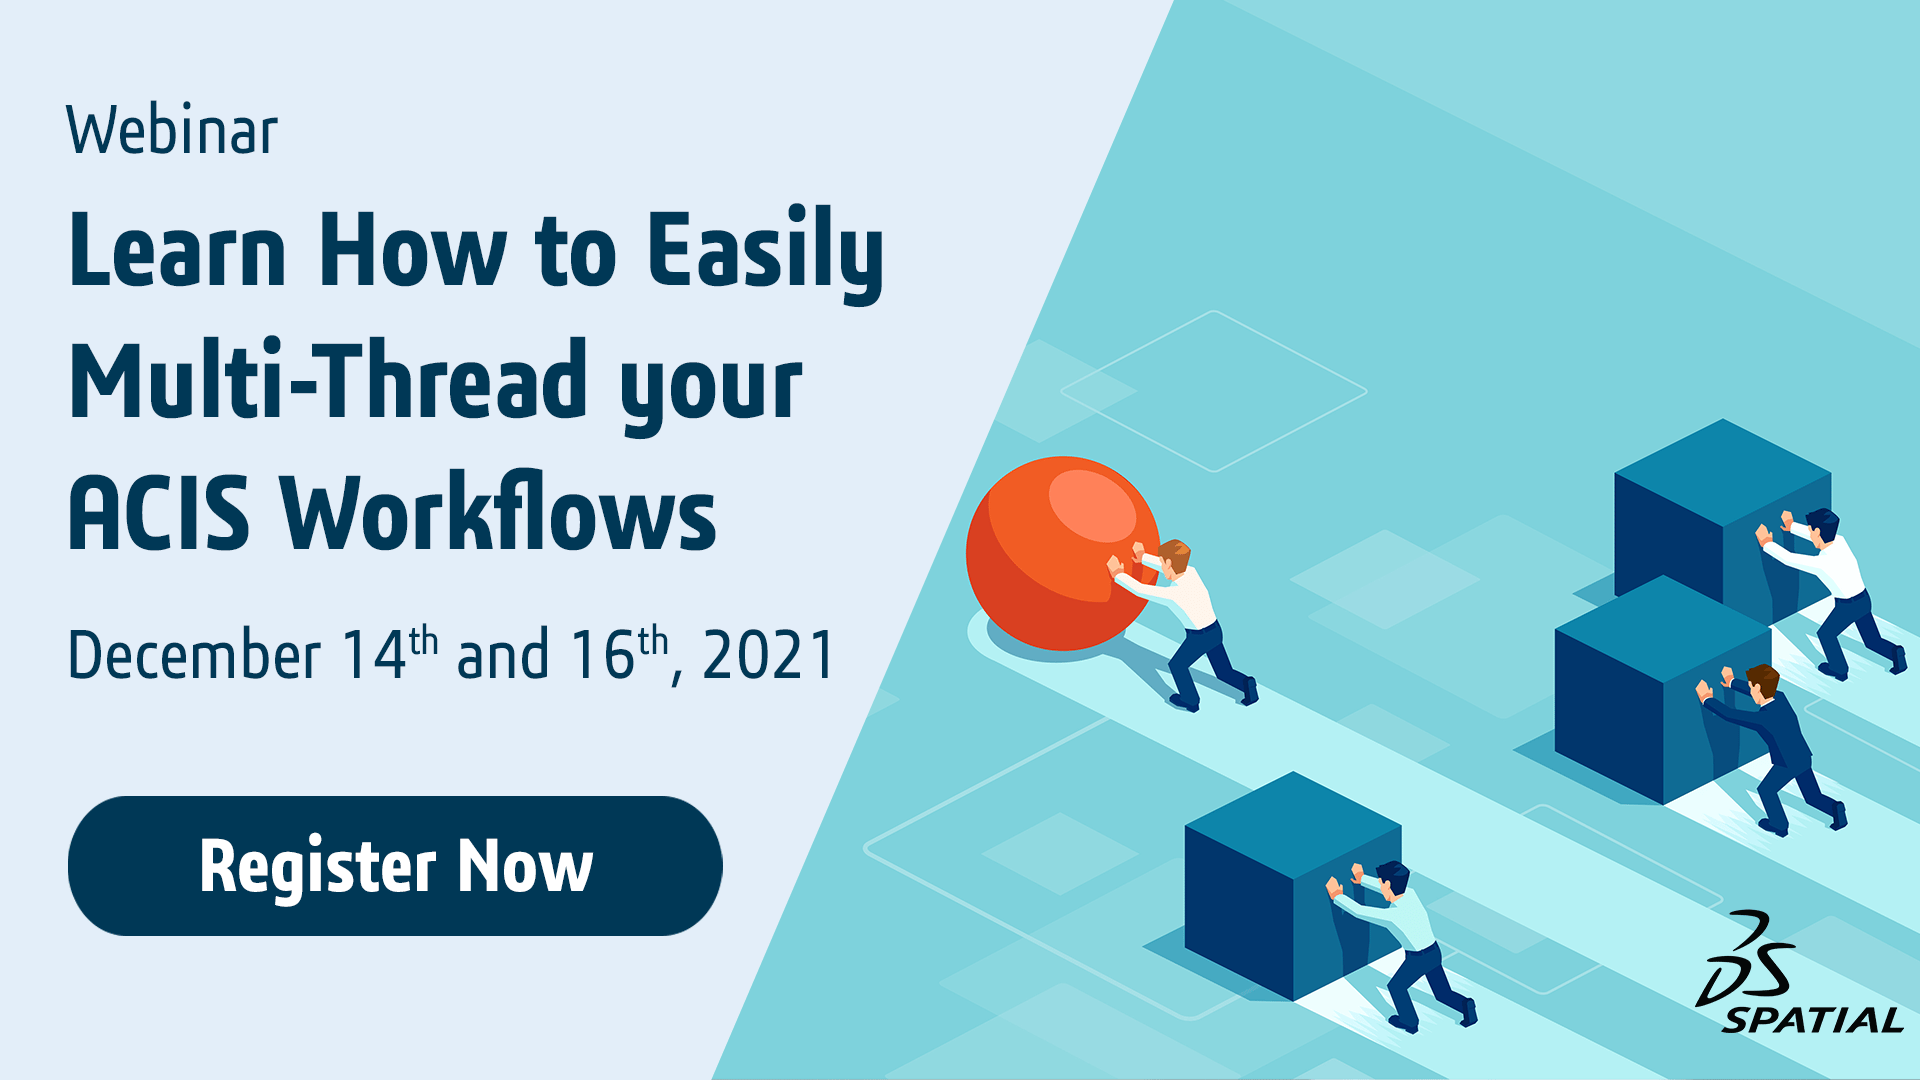 Learn How to Easily Multi-Thread your ACIS Workflows